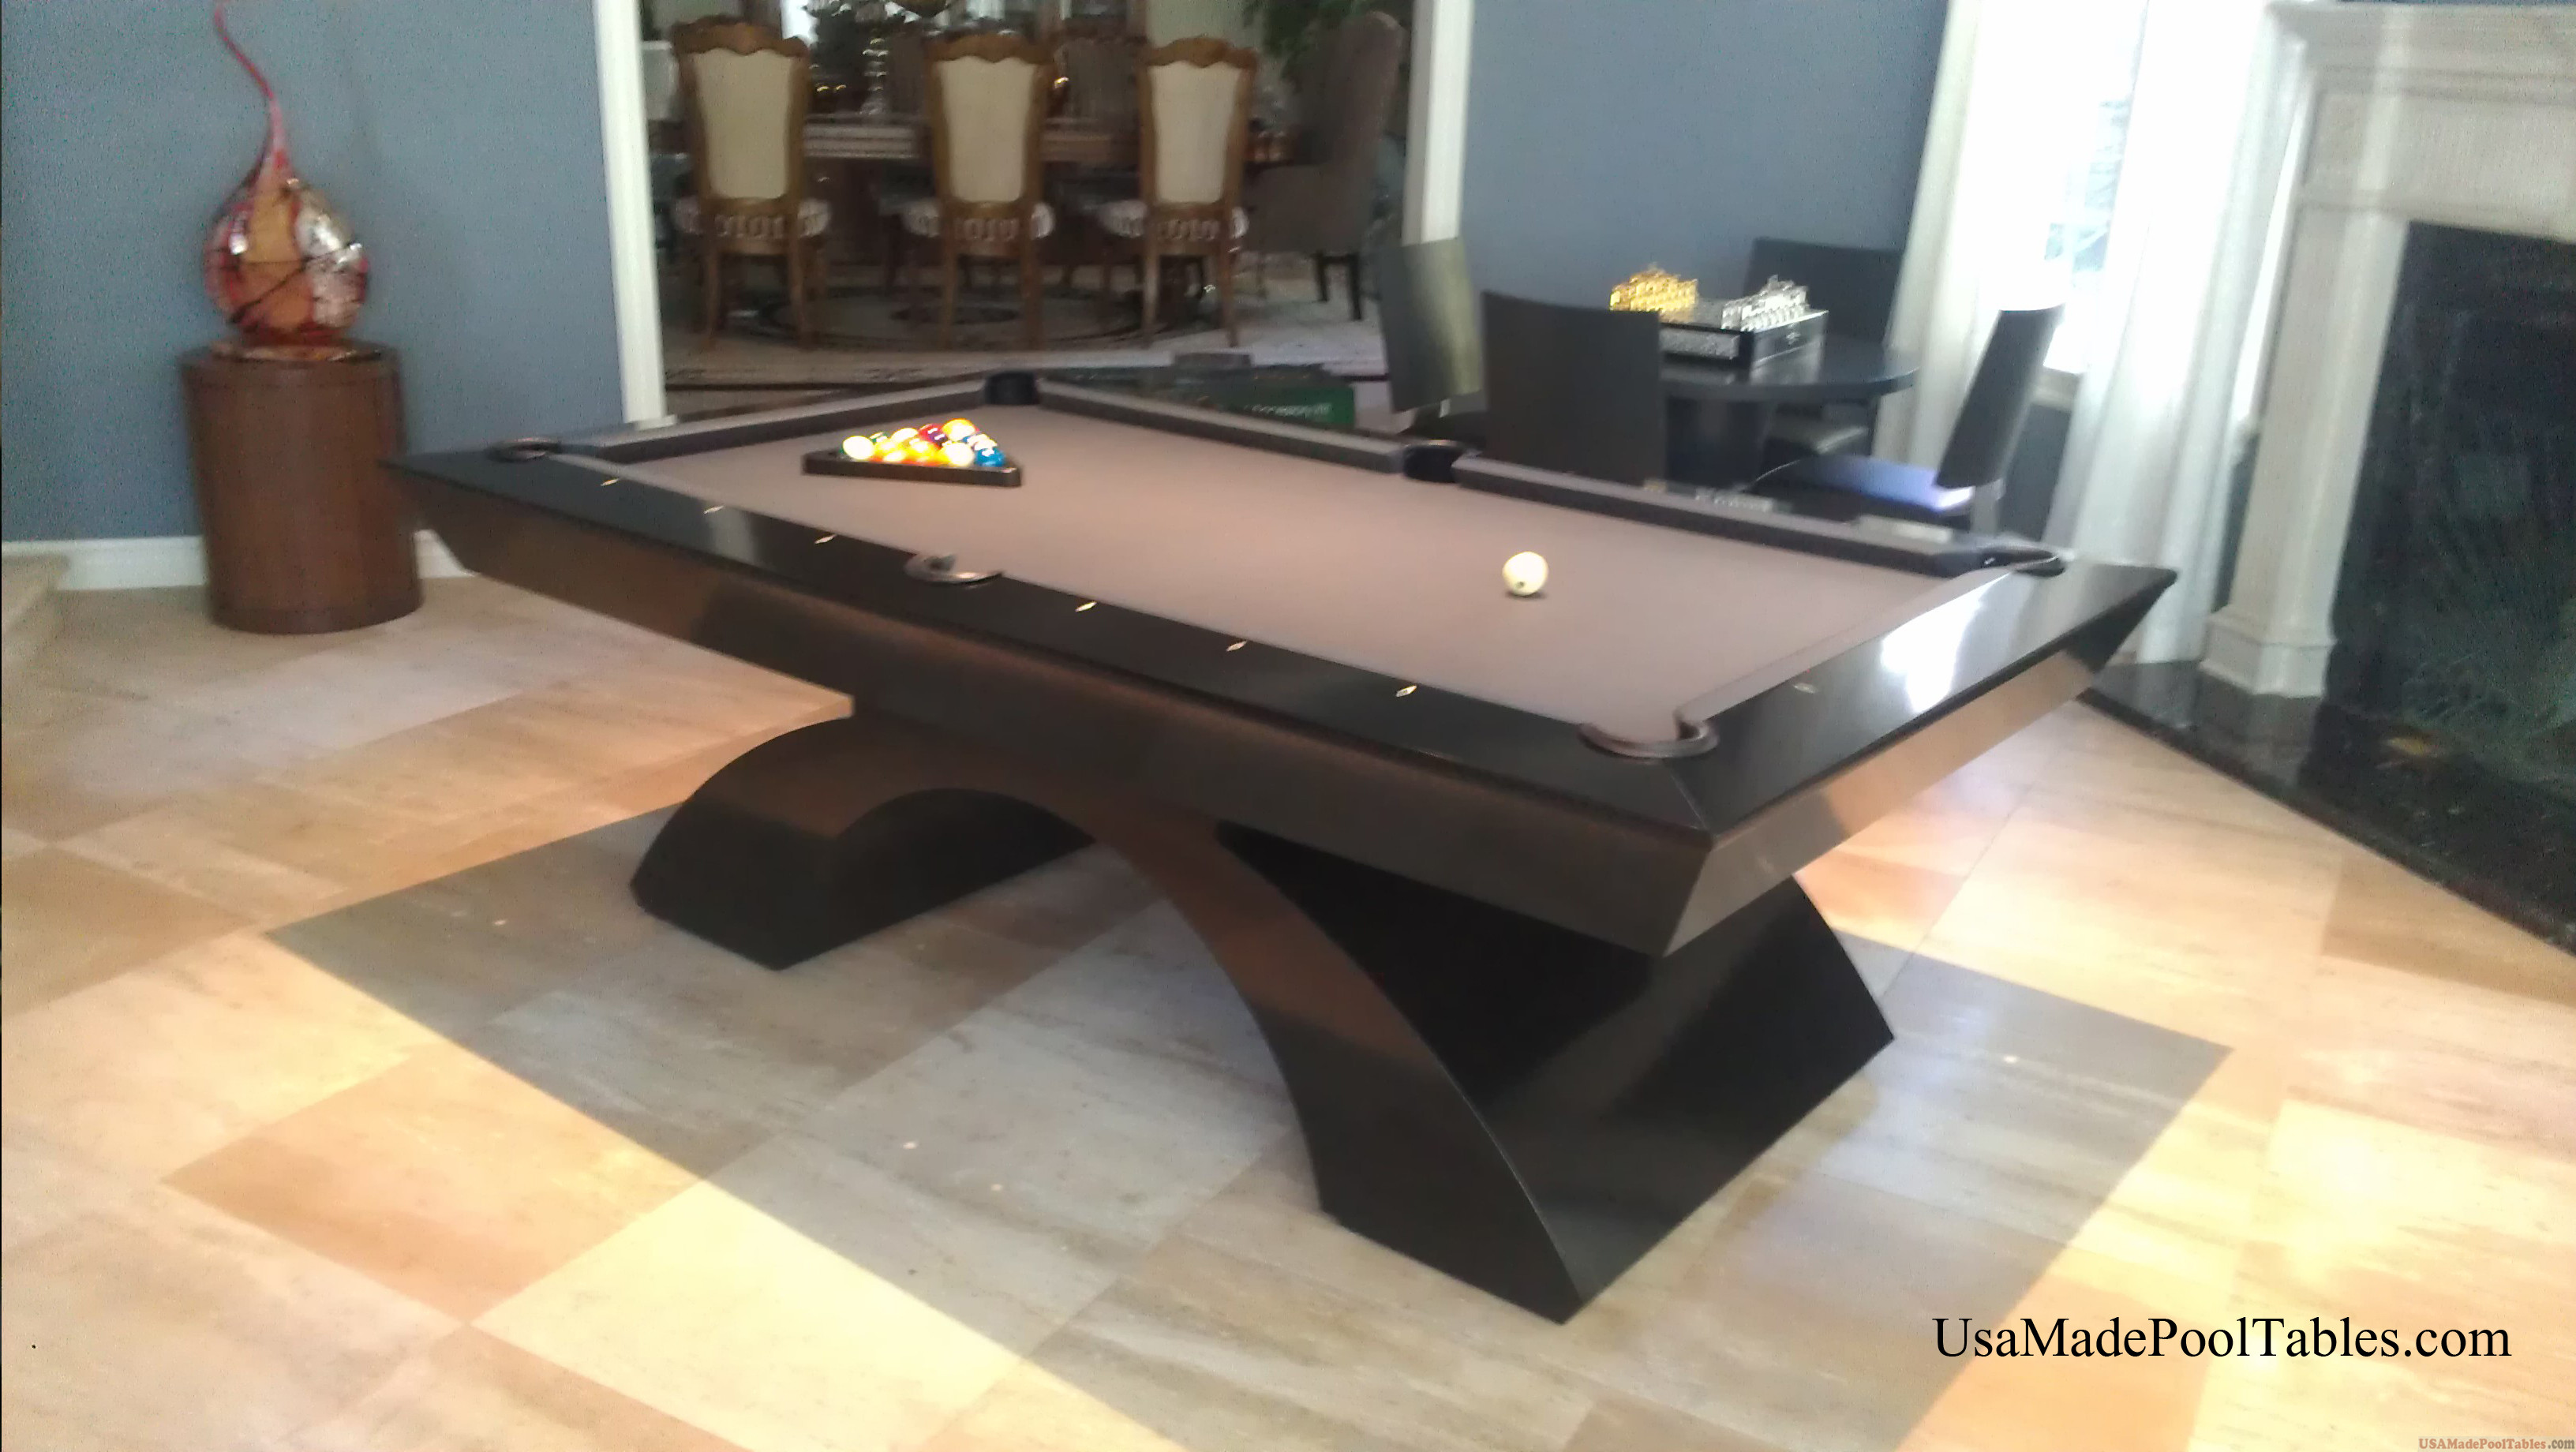 CONTEMPORARY POOL TABLE , MODERN POOL TABLES : MODERN POOL TABLE ...